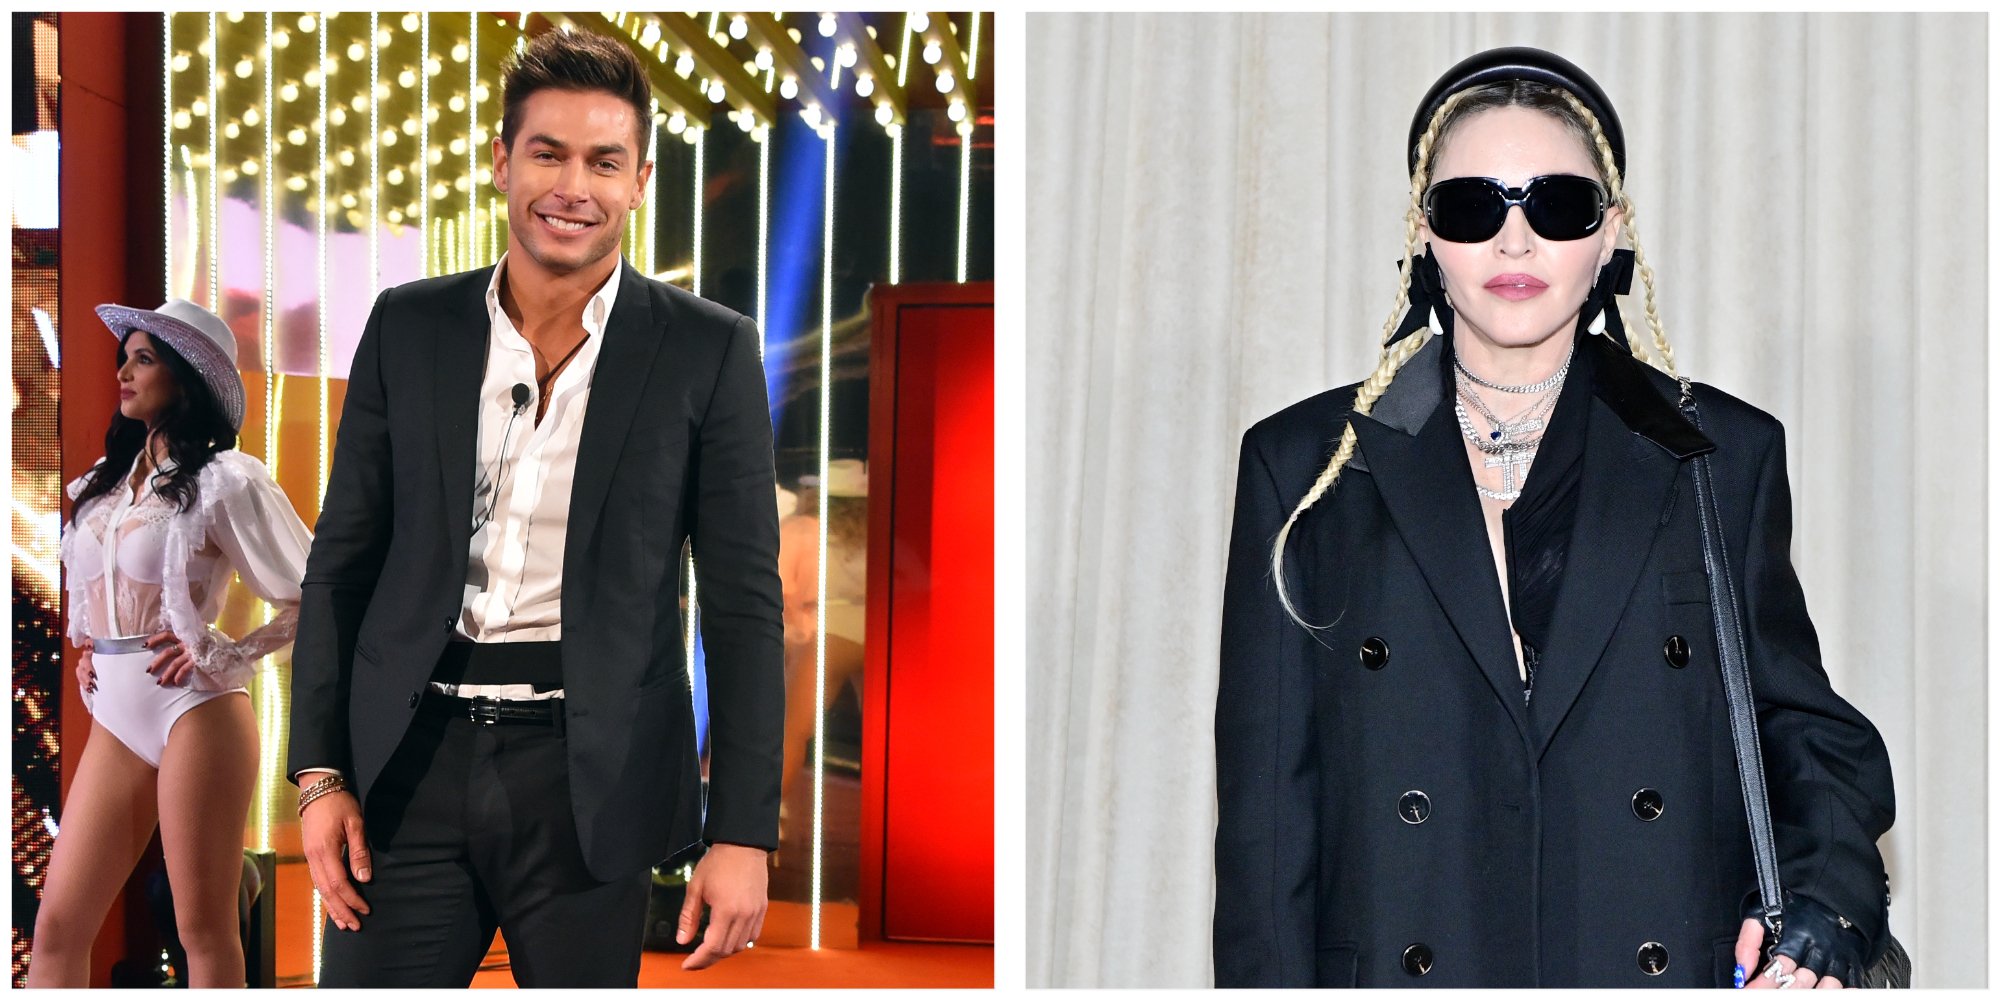 Andrea Denver on the red carpet in Italy. Madonna wearing sunglasses at an event. 